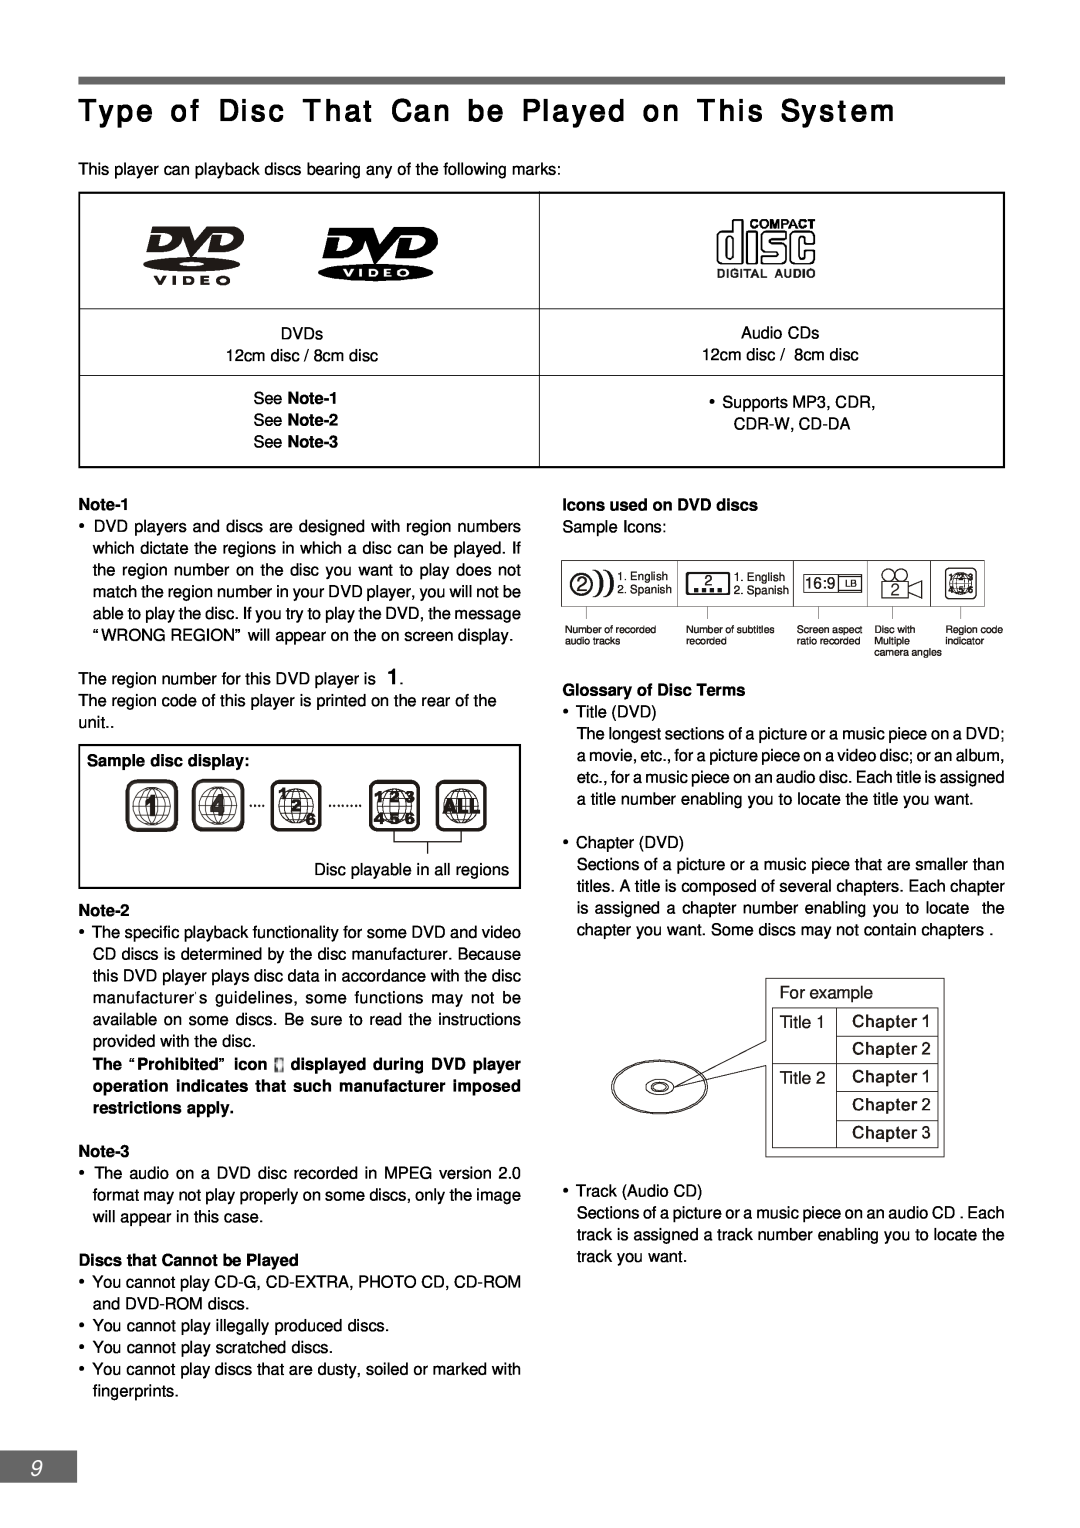 Emerson AV301 owner manual Type of Disc That Can be Played on This System, Sample Icons, For example Title Title 